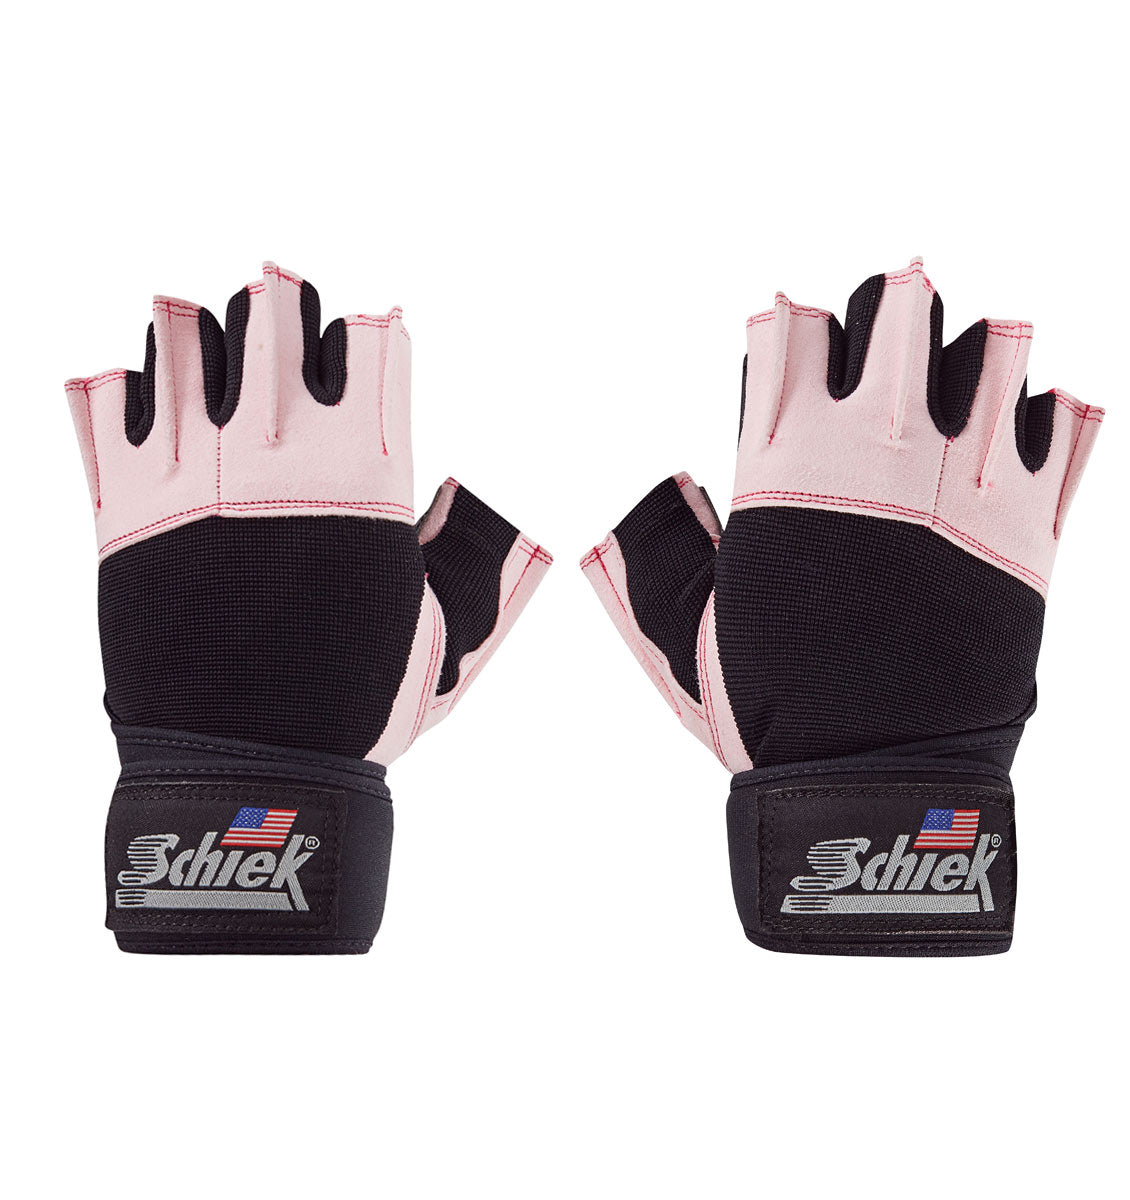 540PINK Schiek Lifting Gym Gloves with Wrist Wraps Pink Pair Top